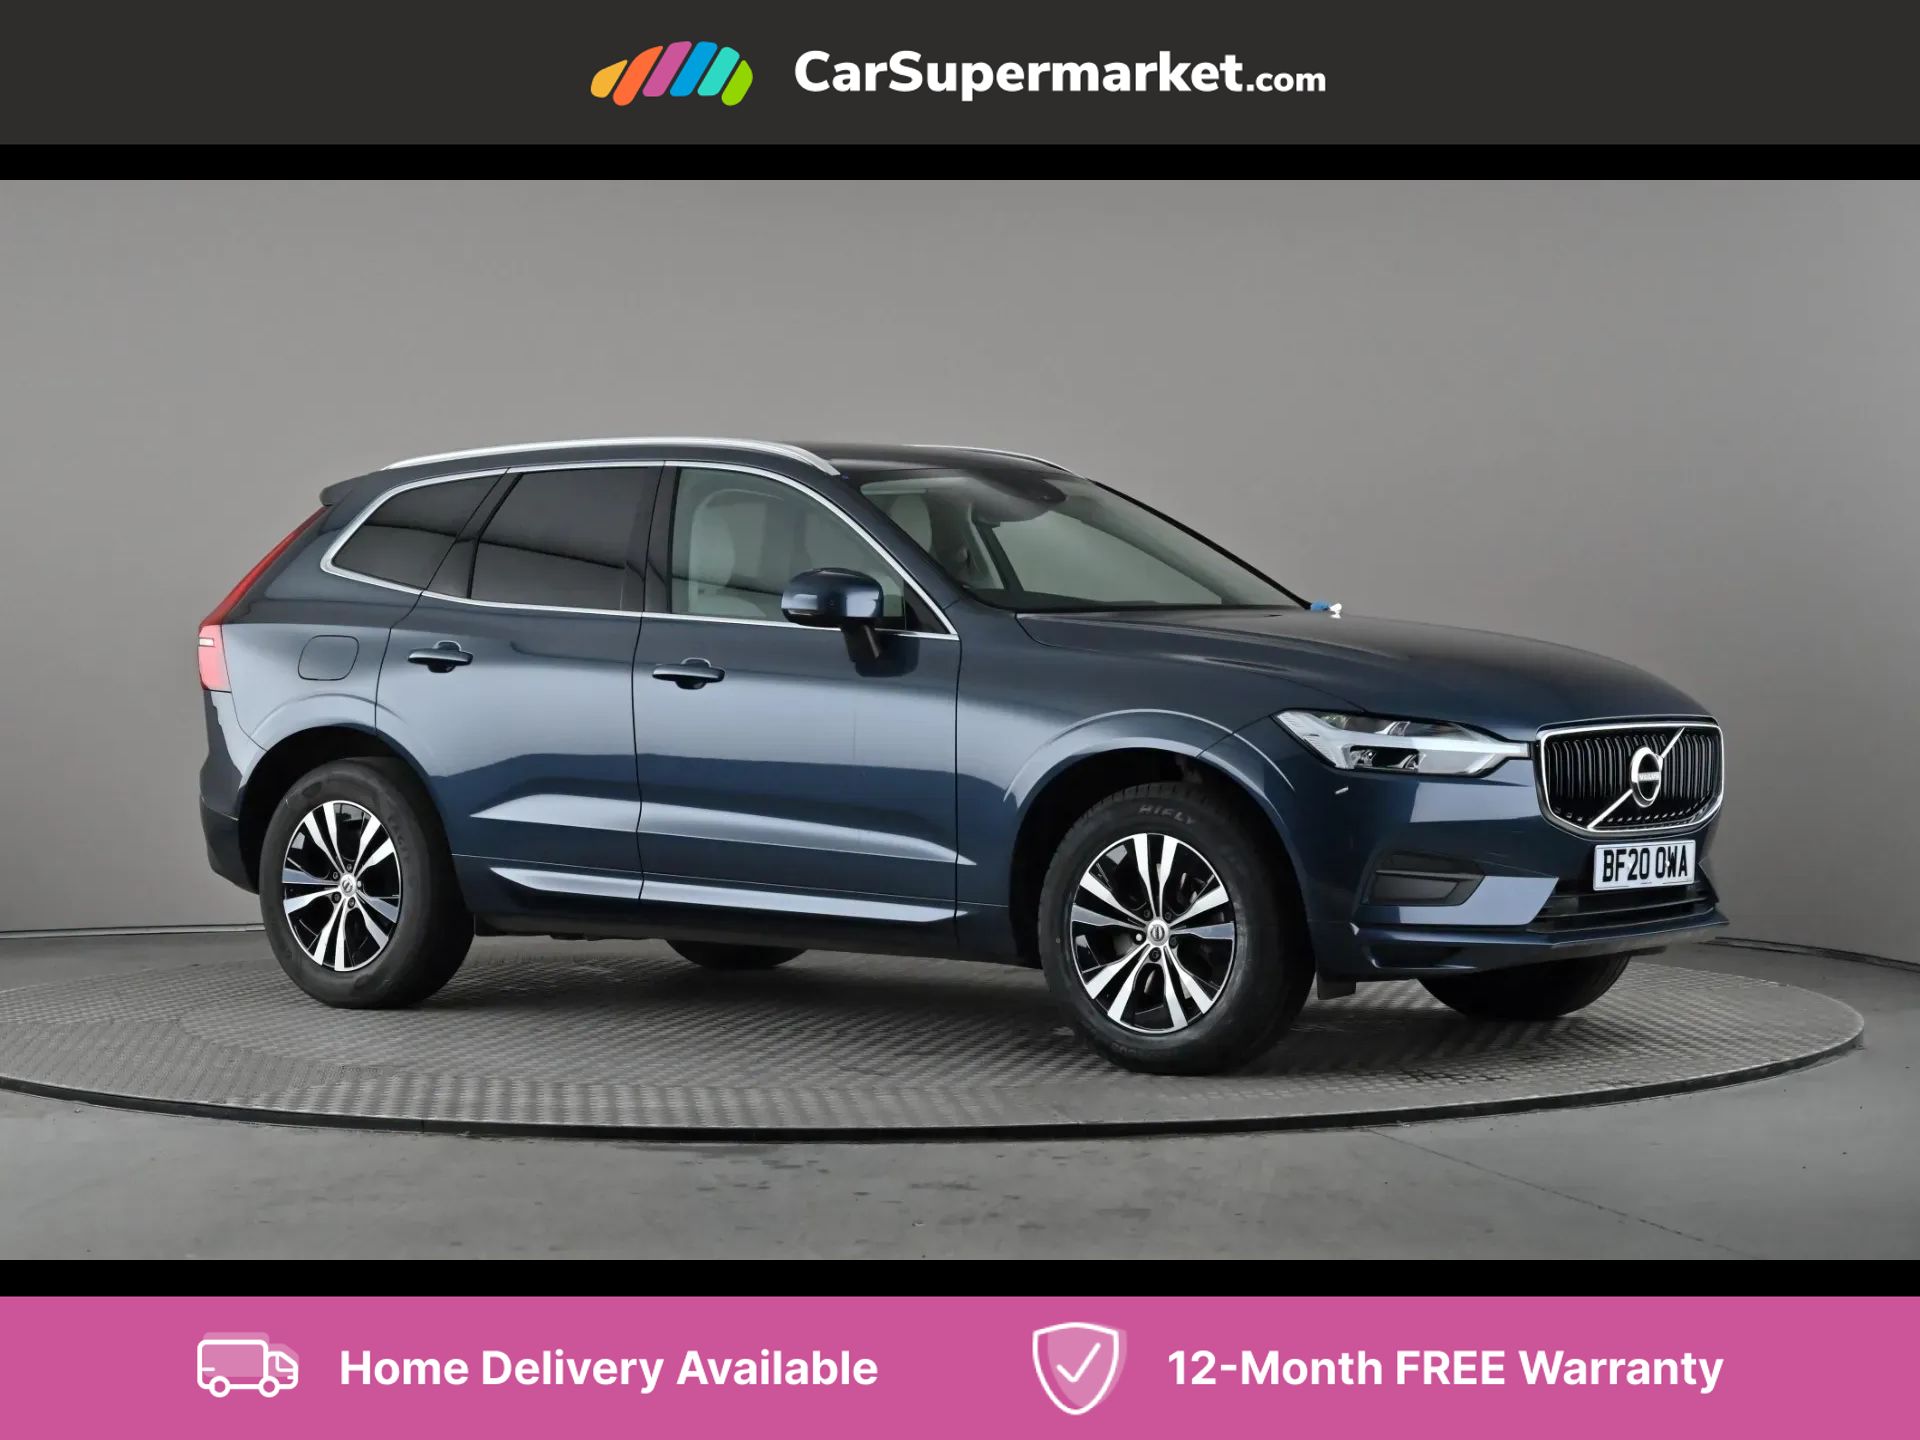 2020 used Volvo Xc60 2.0 D4 Momentum Geartronic